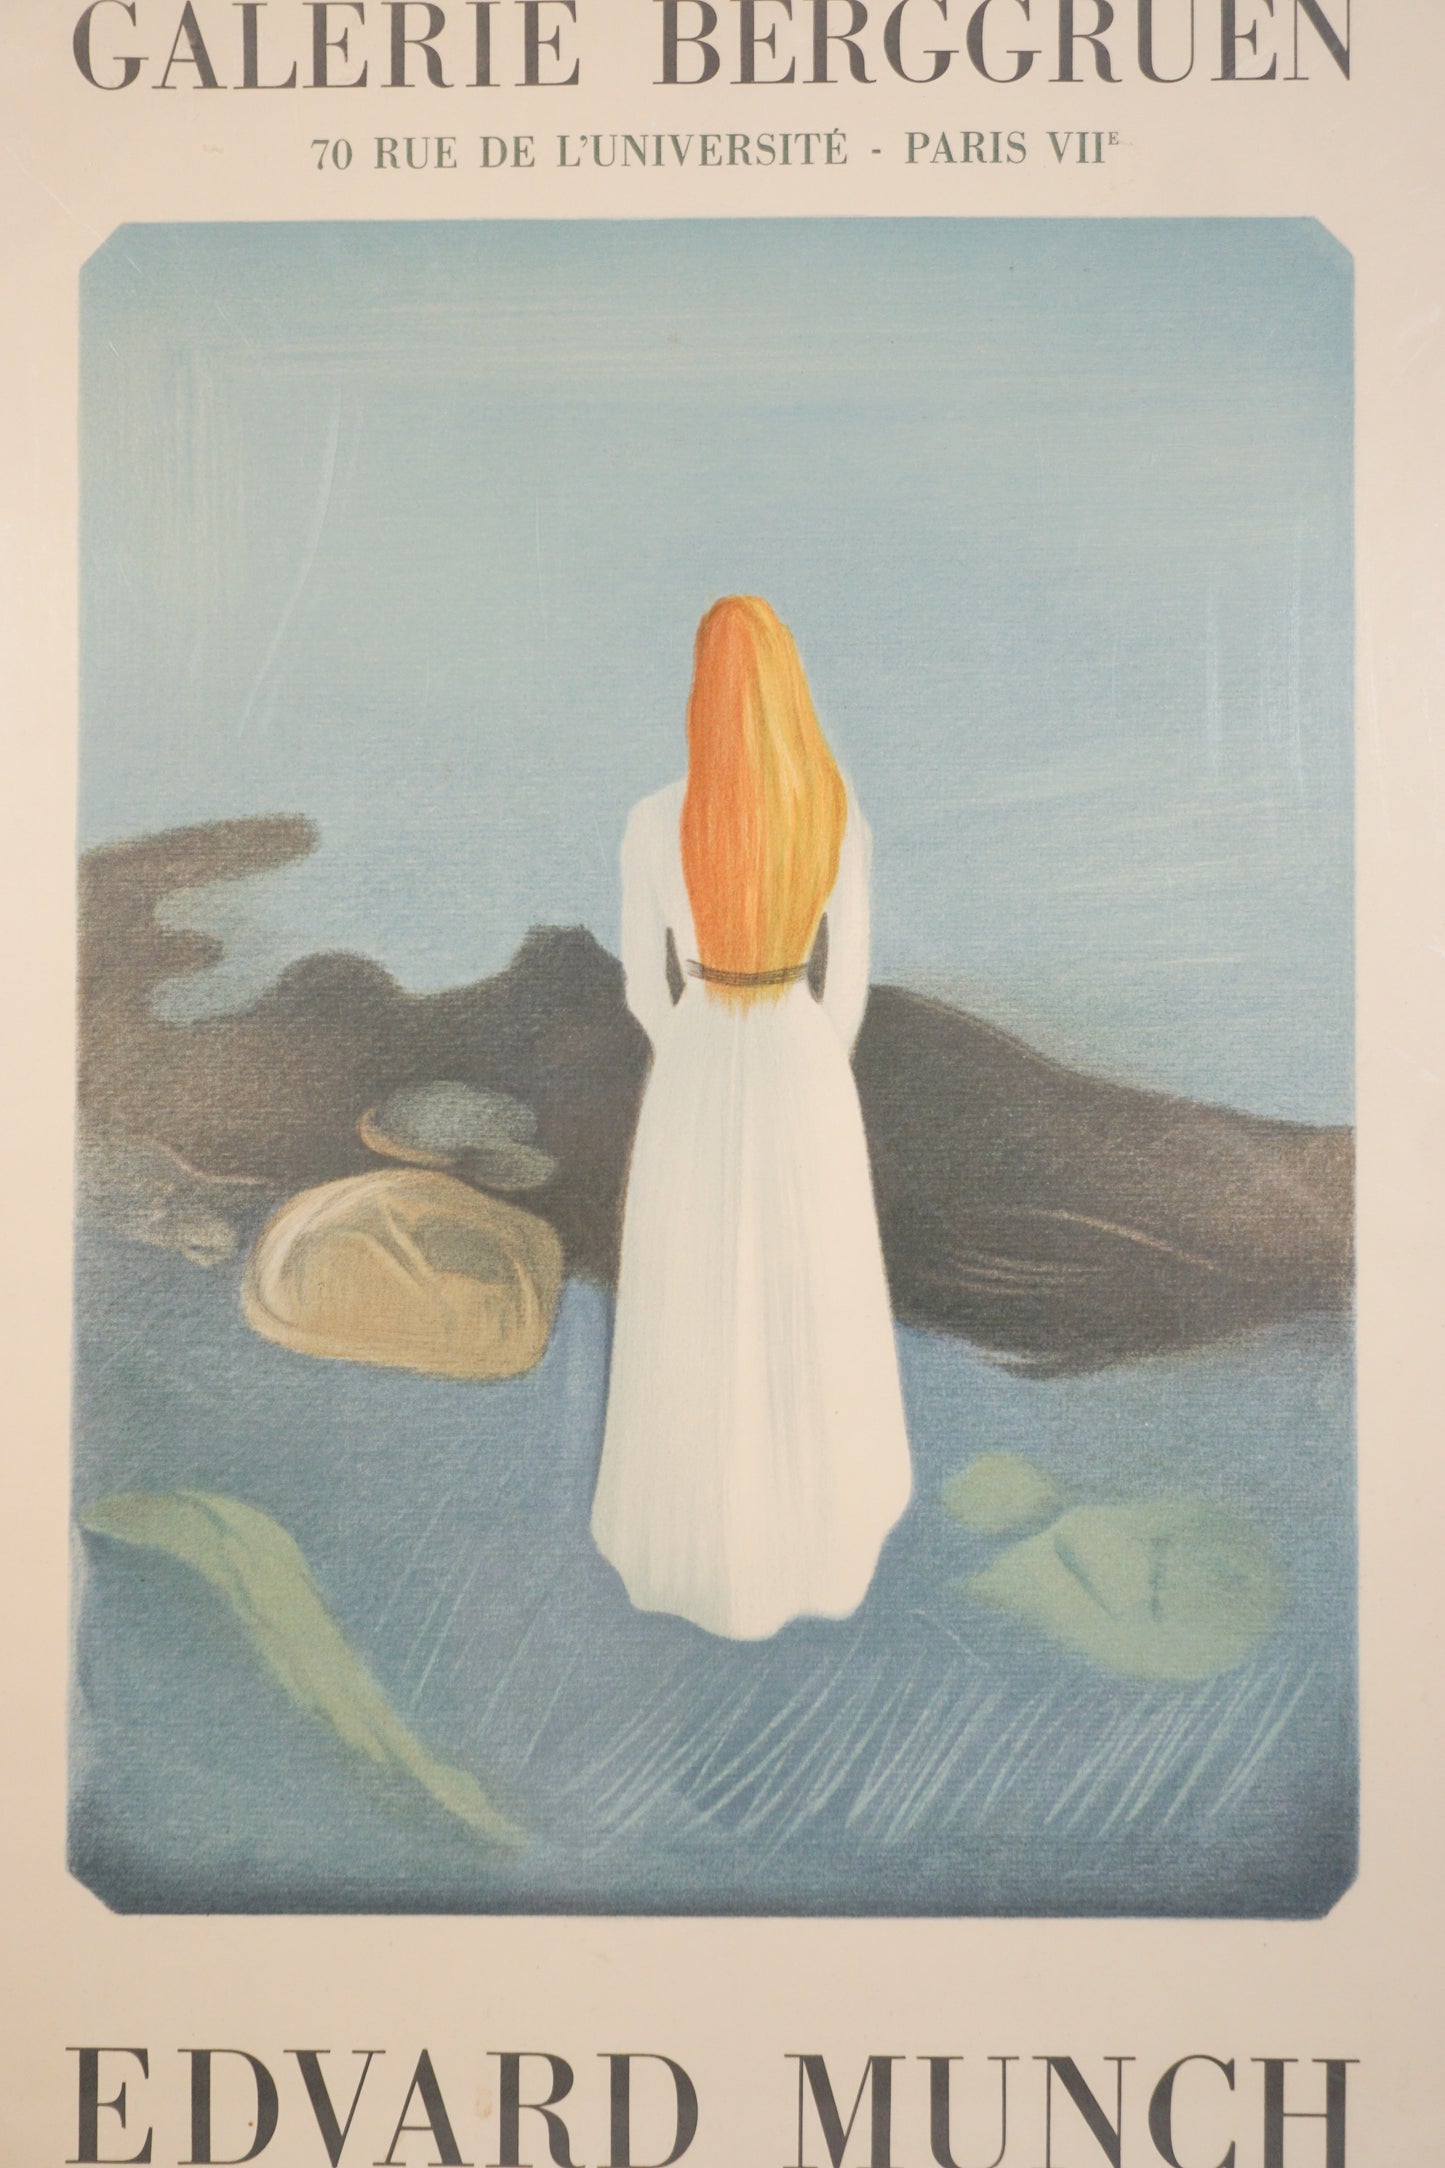 Edvard Munch, Gravures and Lithographs, exhibition poster, 1983